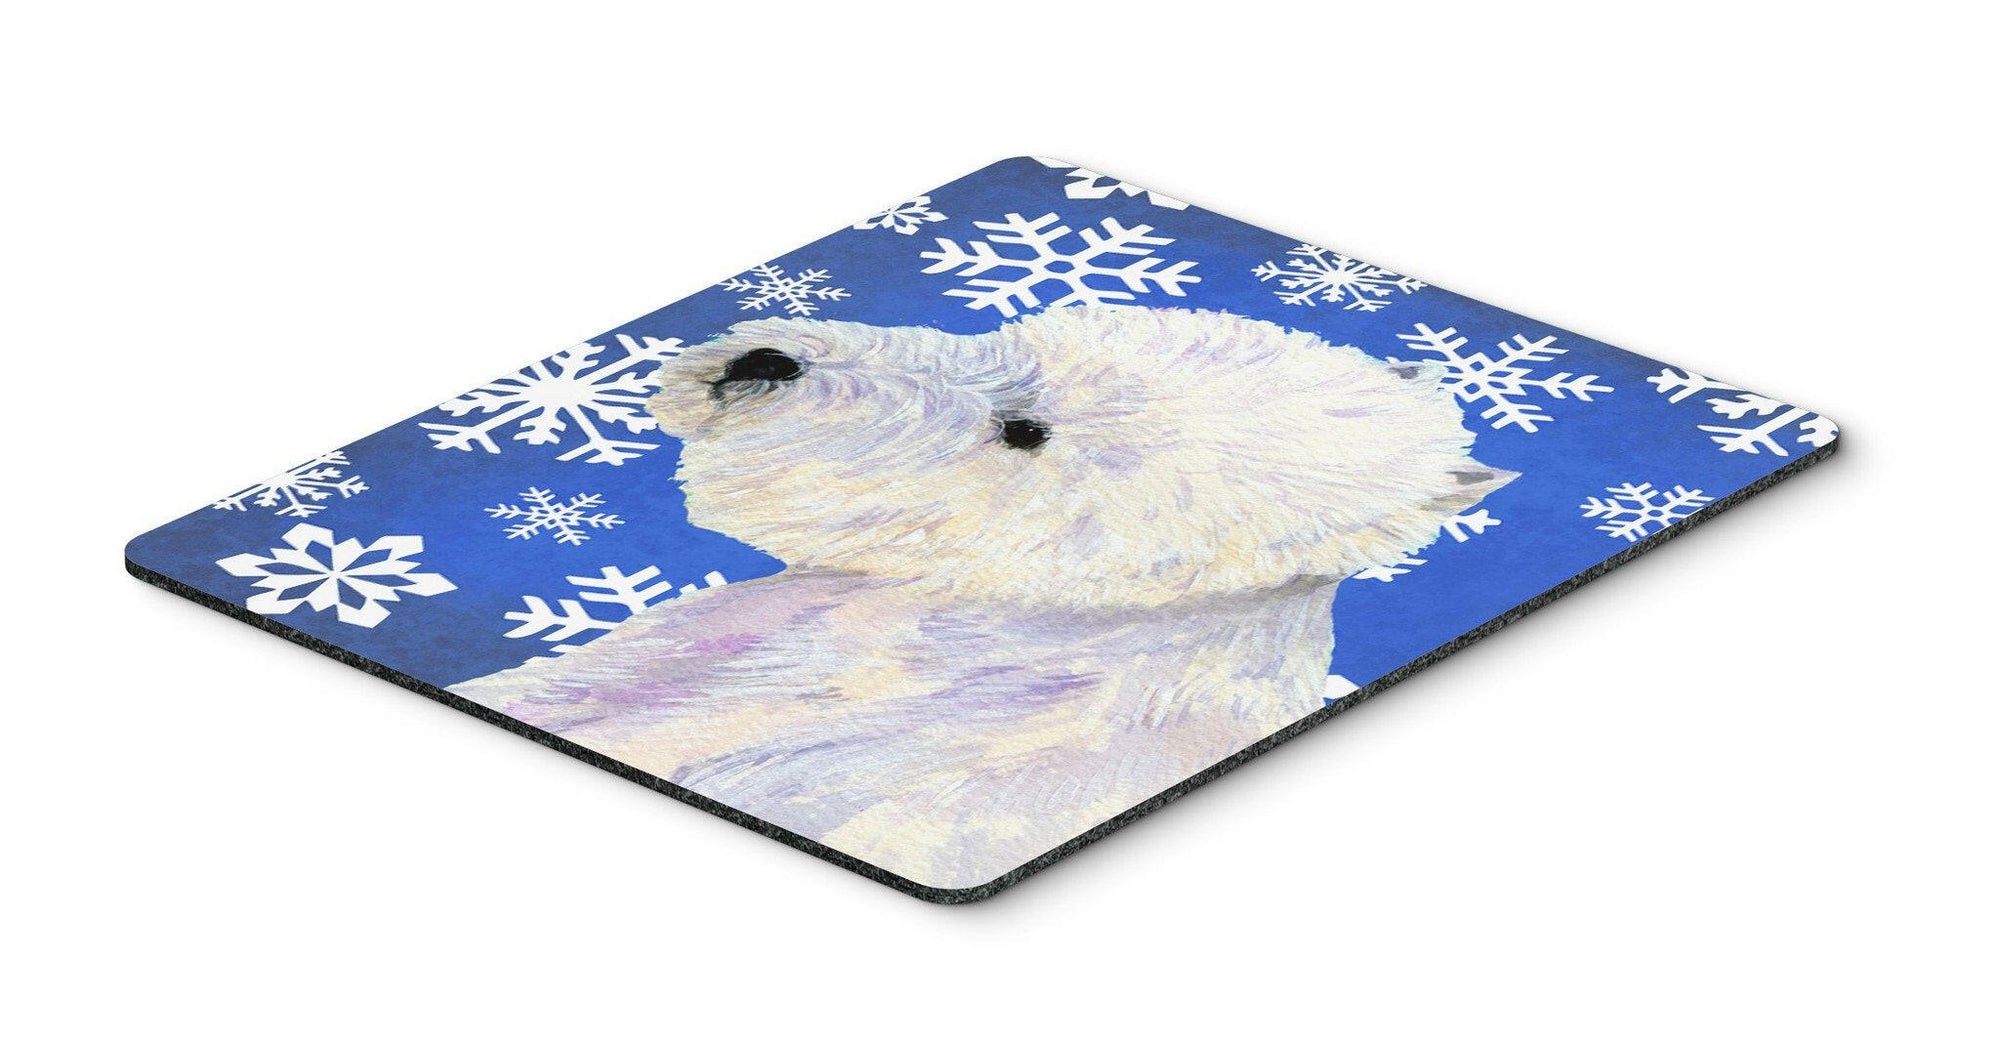 Westie Winter Snowflakes Holiday Mouse Pad, Hot Pad or Trivet by Caroline's Treasures